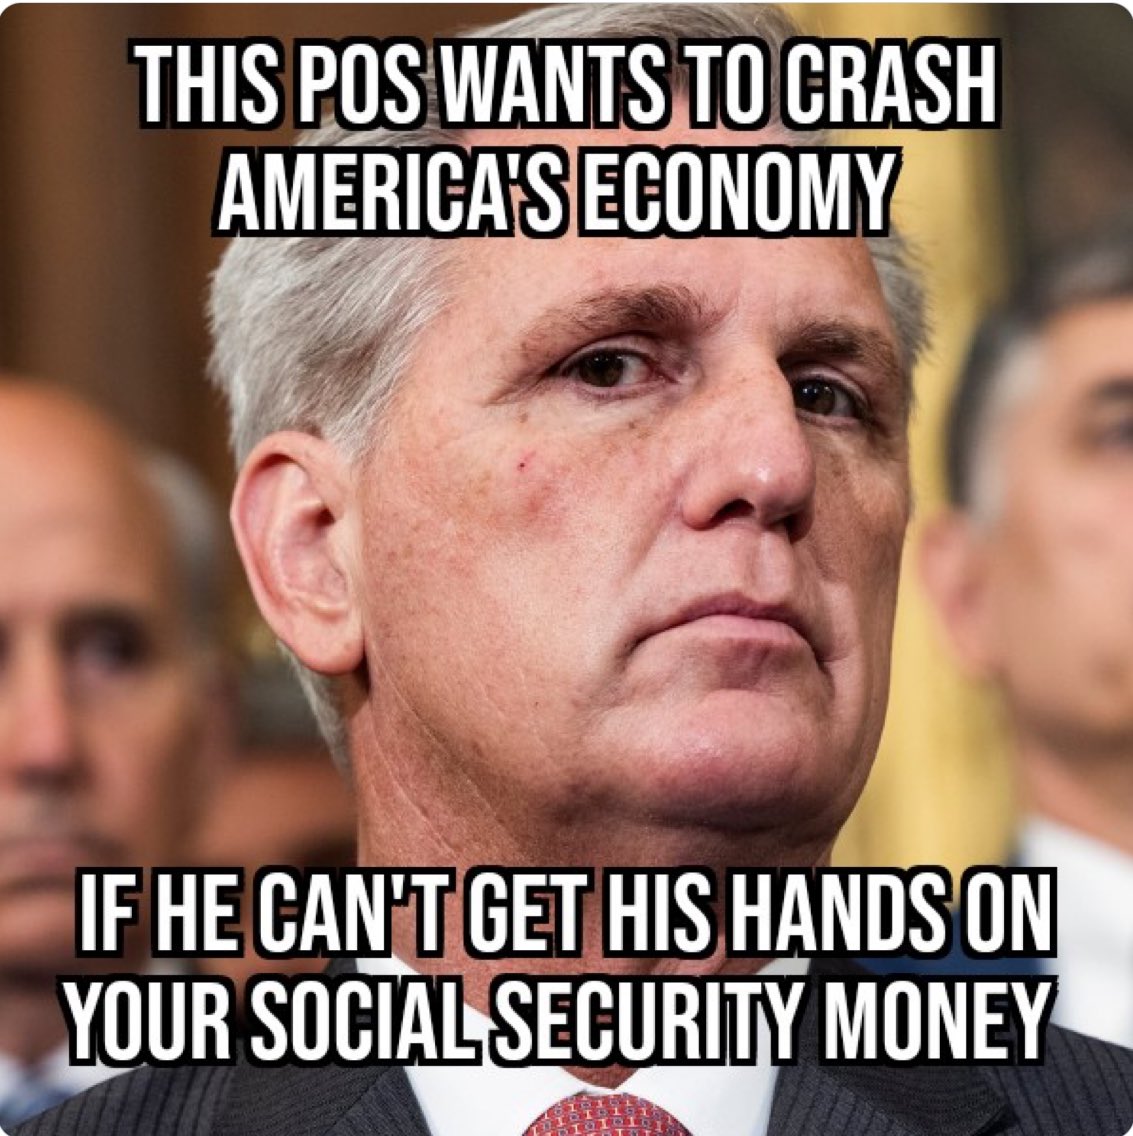 Kevin McCarthy and the corrupt GOP are holding the country’s wellbeing hostage to crash the economy and blame President Biden. Republicans do not care about the people they hurt by refusing to raise the #DebtCeiling although they did so for Trump 3x. #RepublicanDefaultDisaster